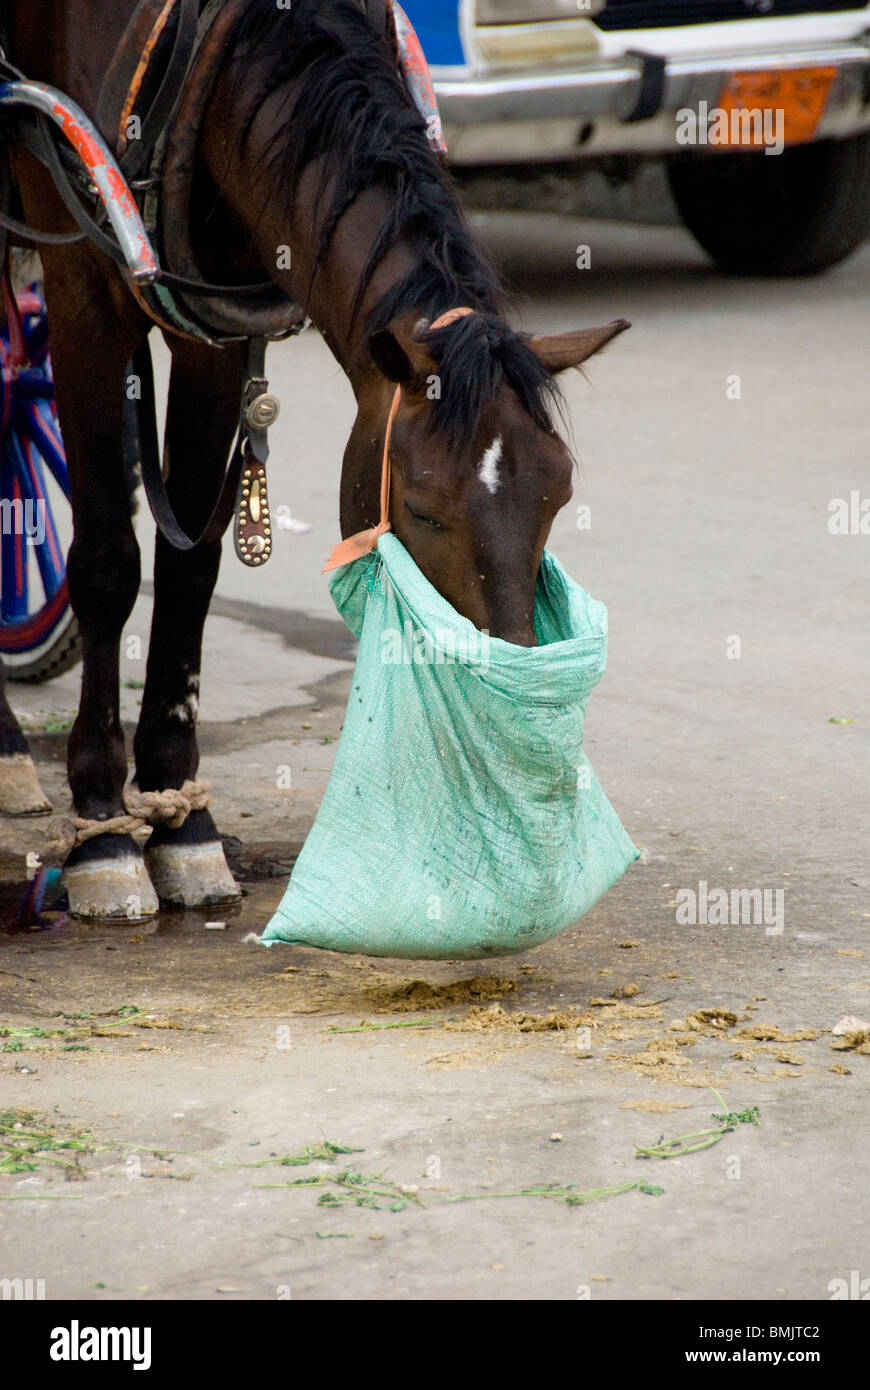 Egypt, Luxor. Street carriage horse eating from feed bag. Stock Photo